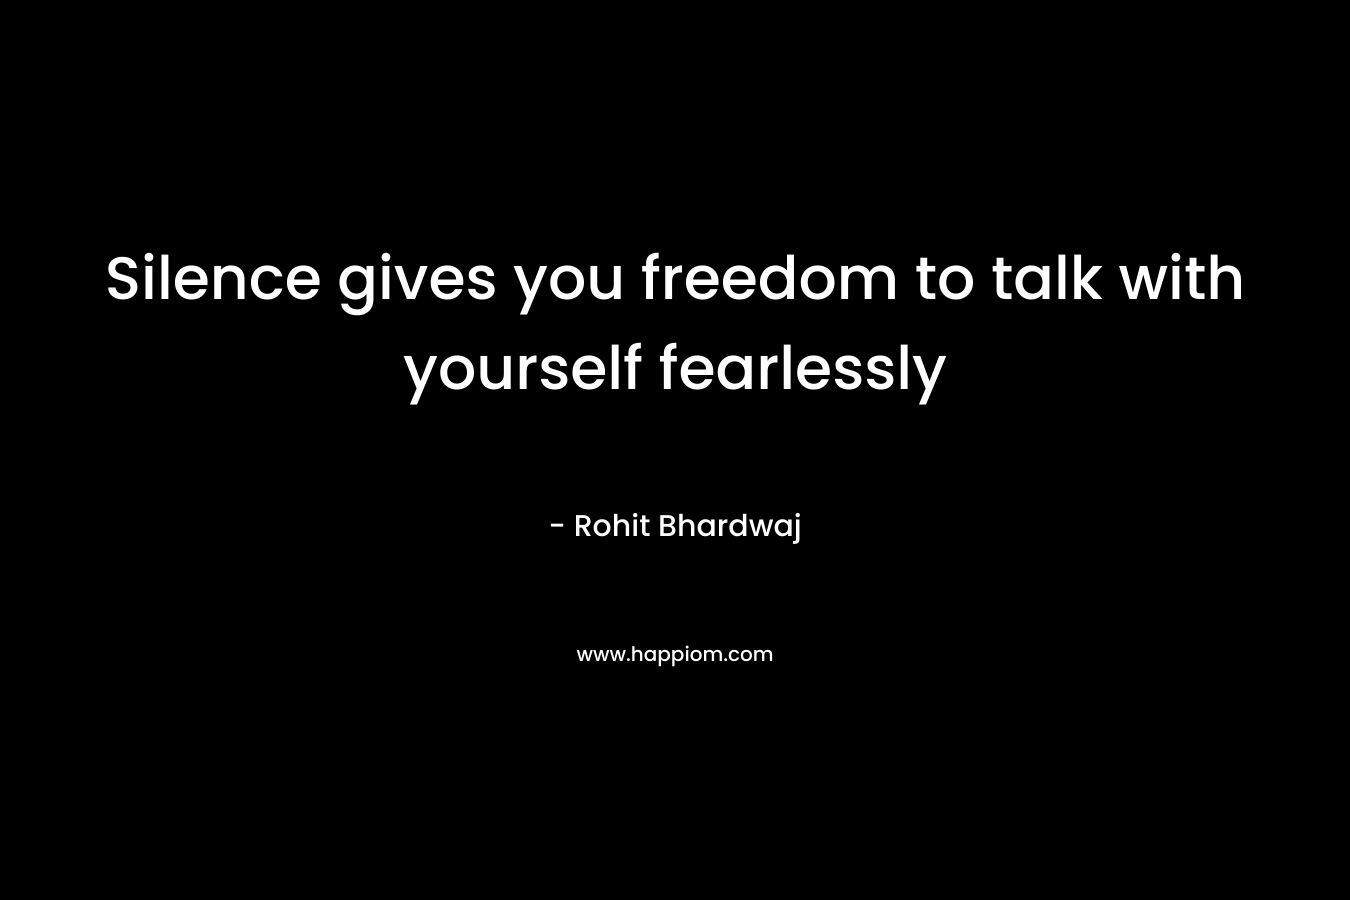 Silence gives you freedom to talk with yourself fearlessly